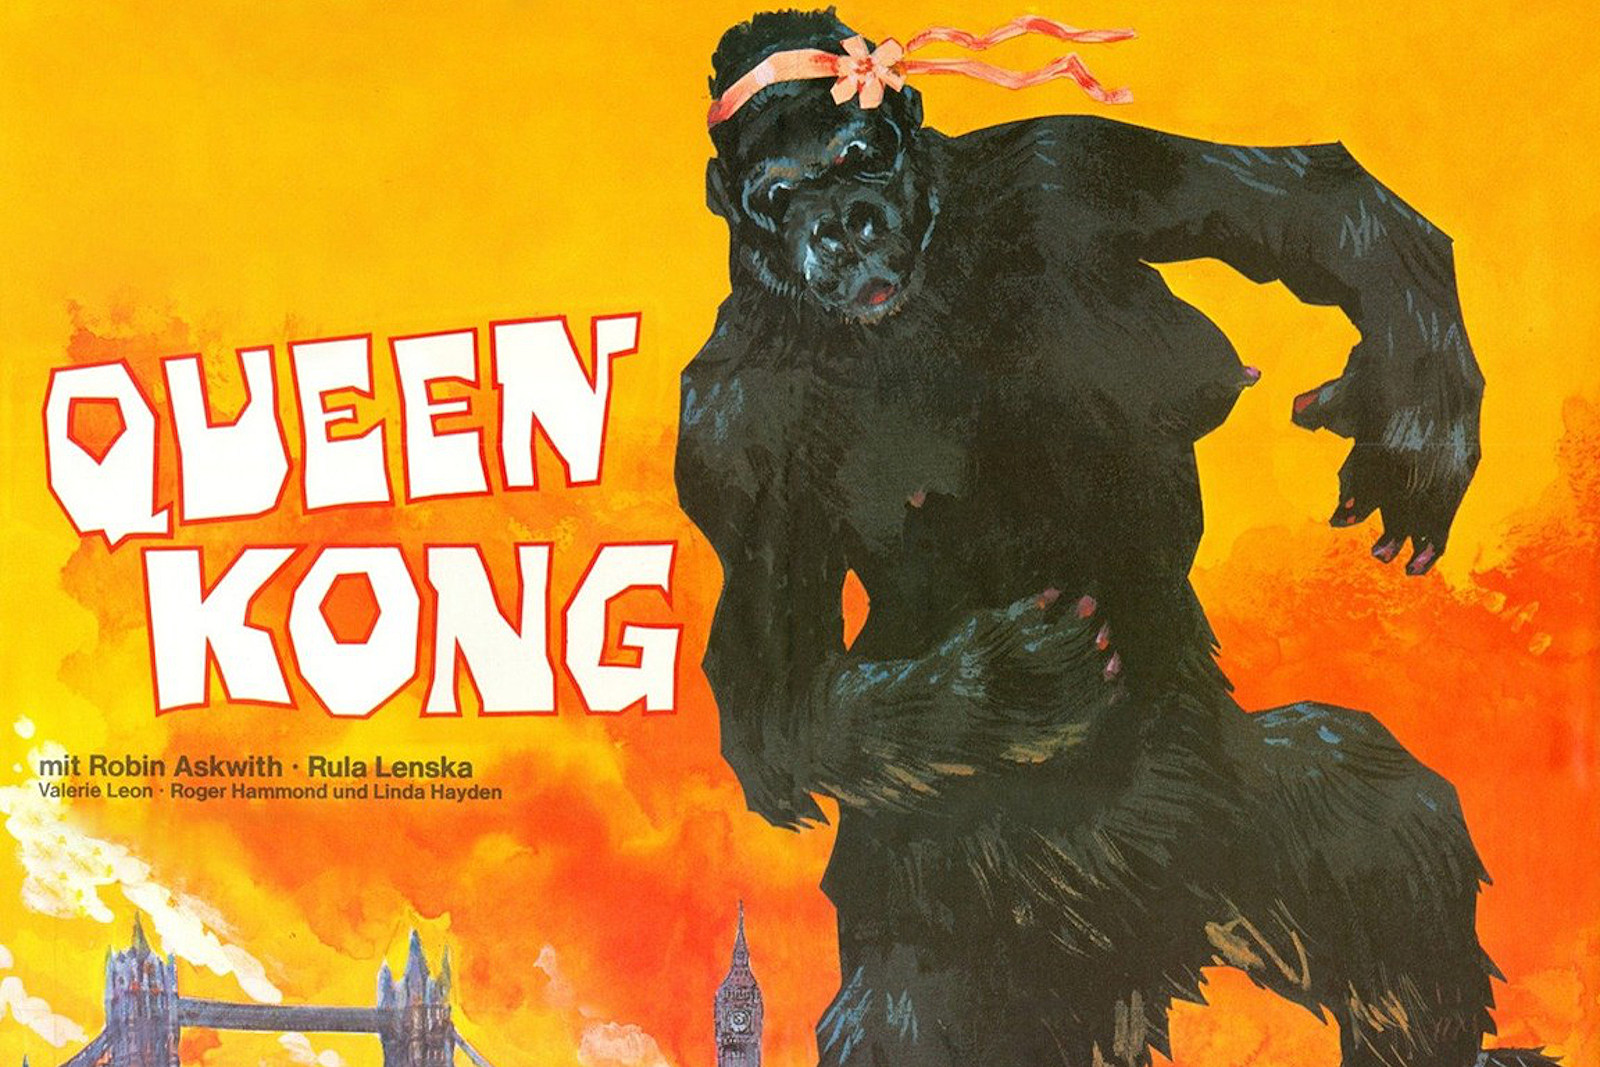 45 Years Ago: ‘Queen Kong’ Gets Caged in Lawsuits